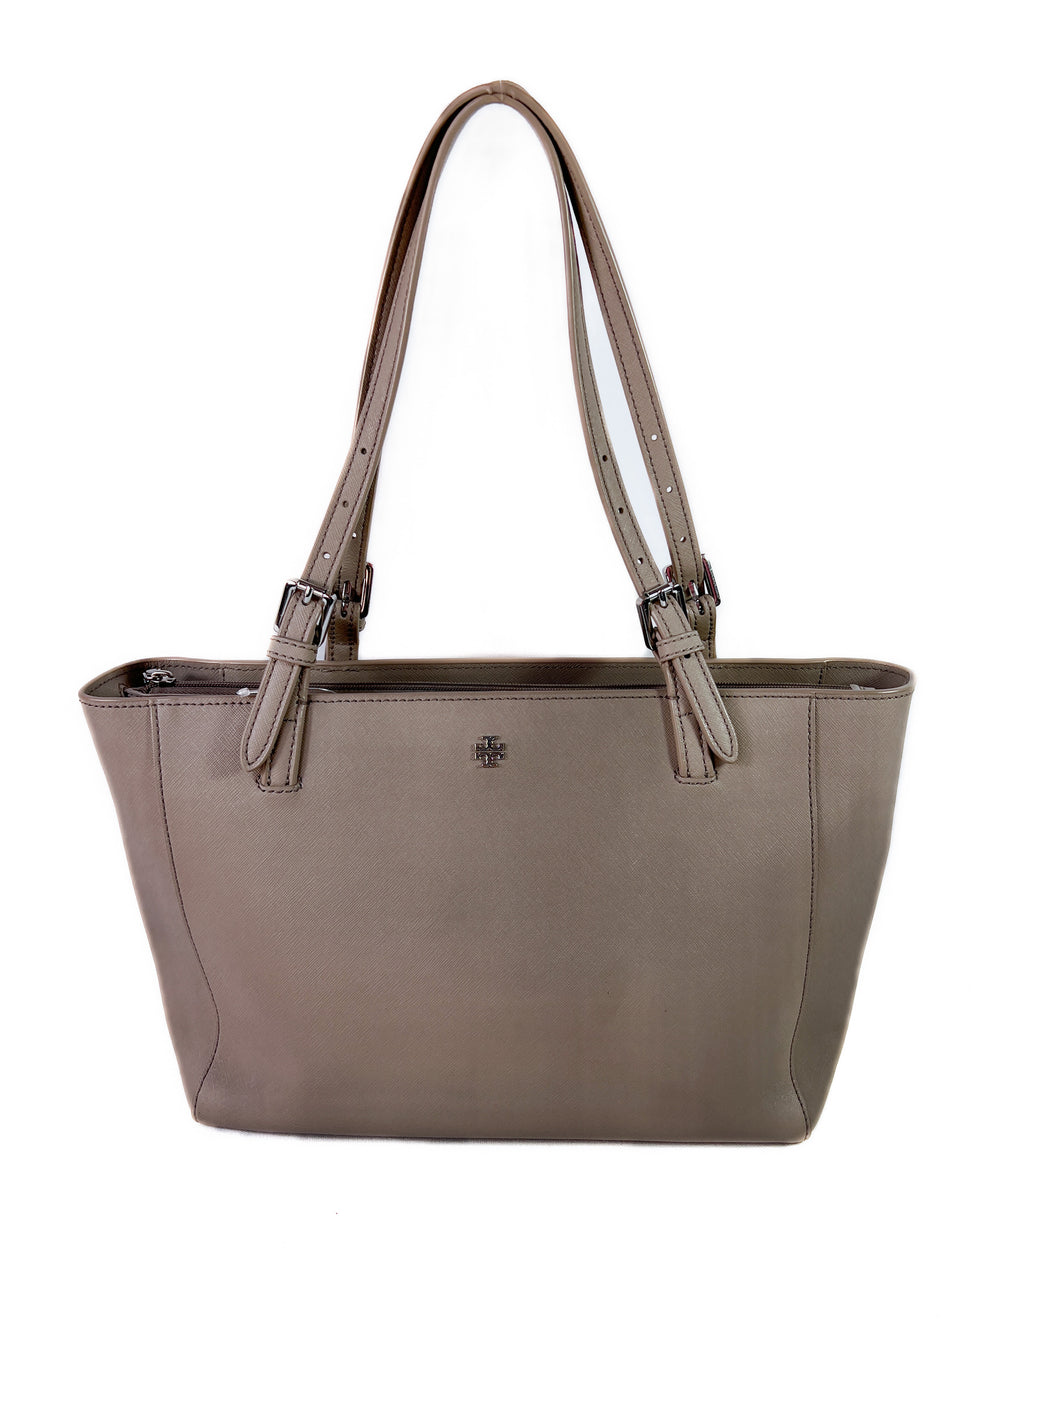 Tory Burch light gray leather tote